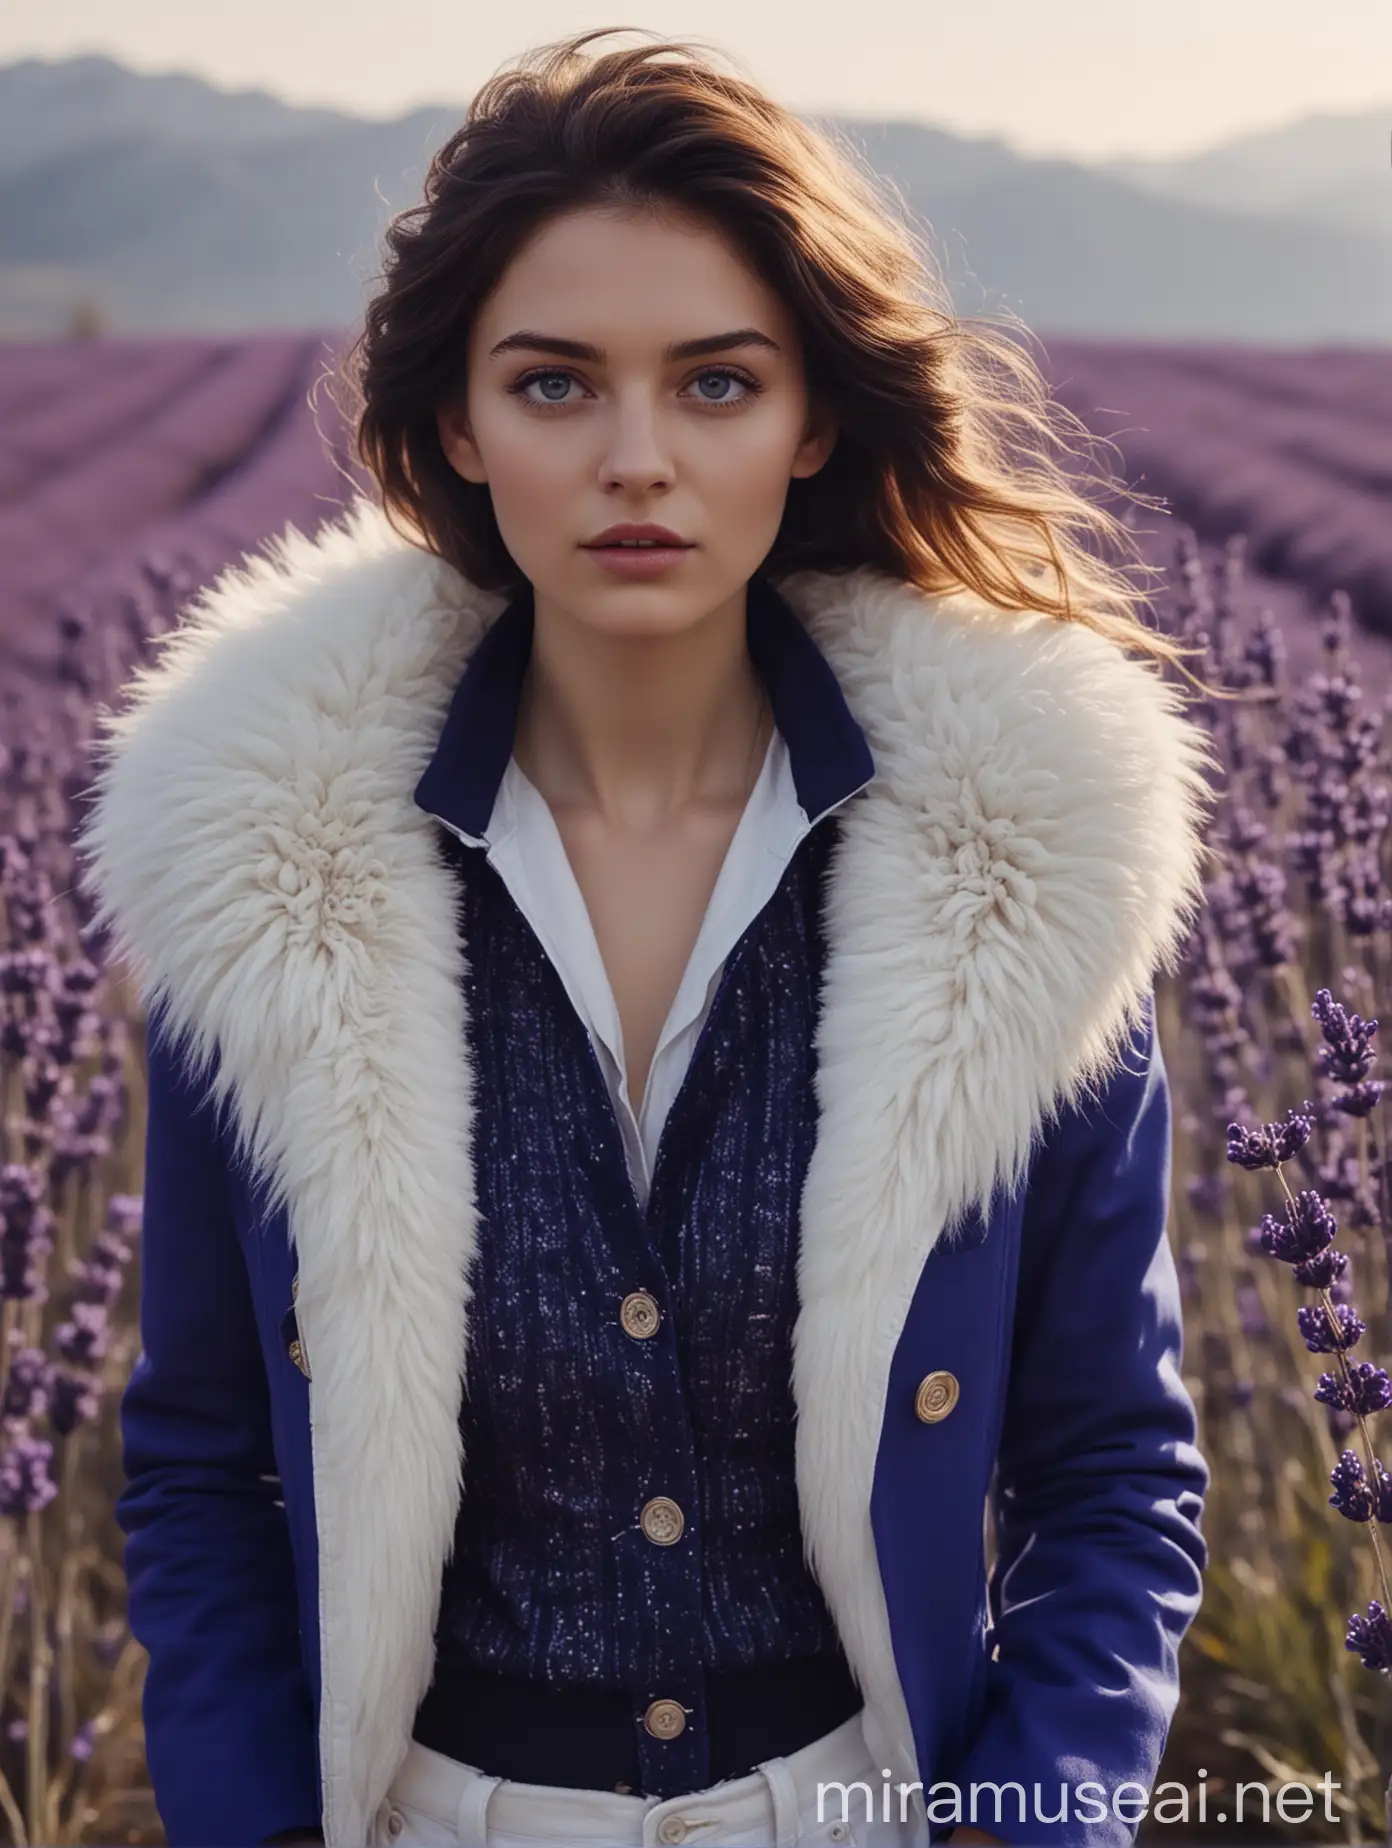 A tall slender woman with lavender eyes, a royal blue jacket with a white fur collar, a lavender scarf or sweater and blue pants, athletic, portrait, cinematic 